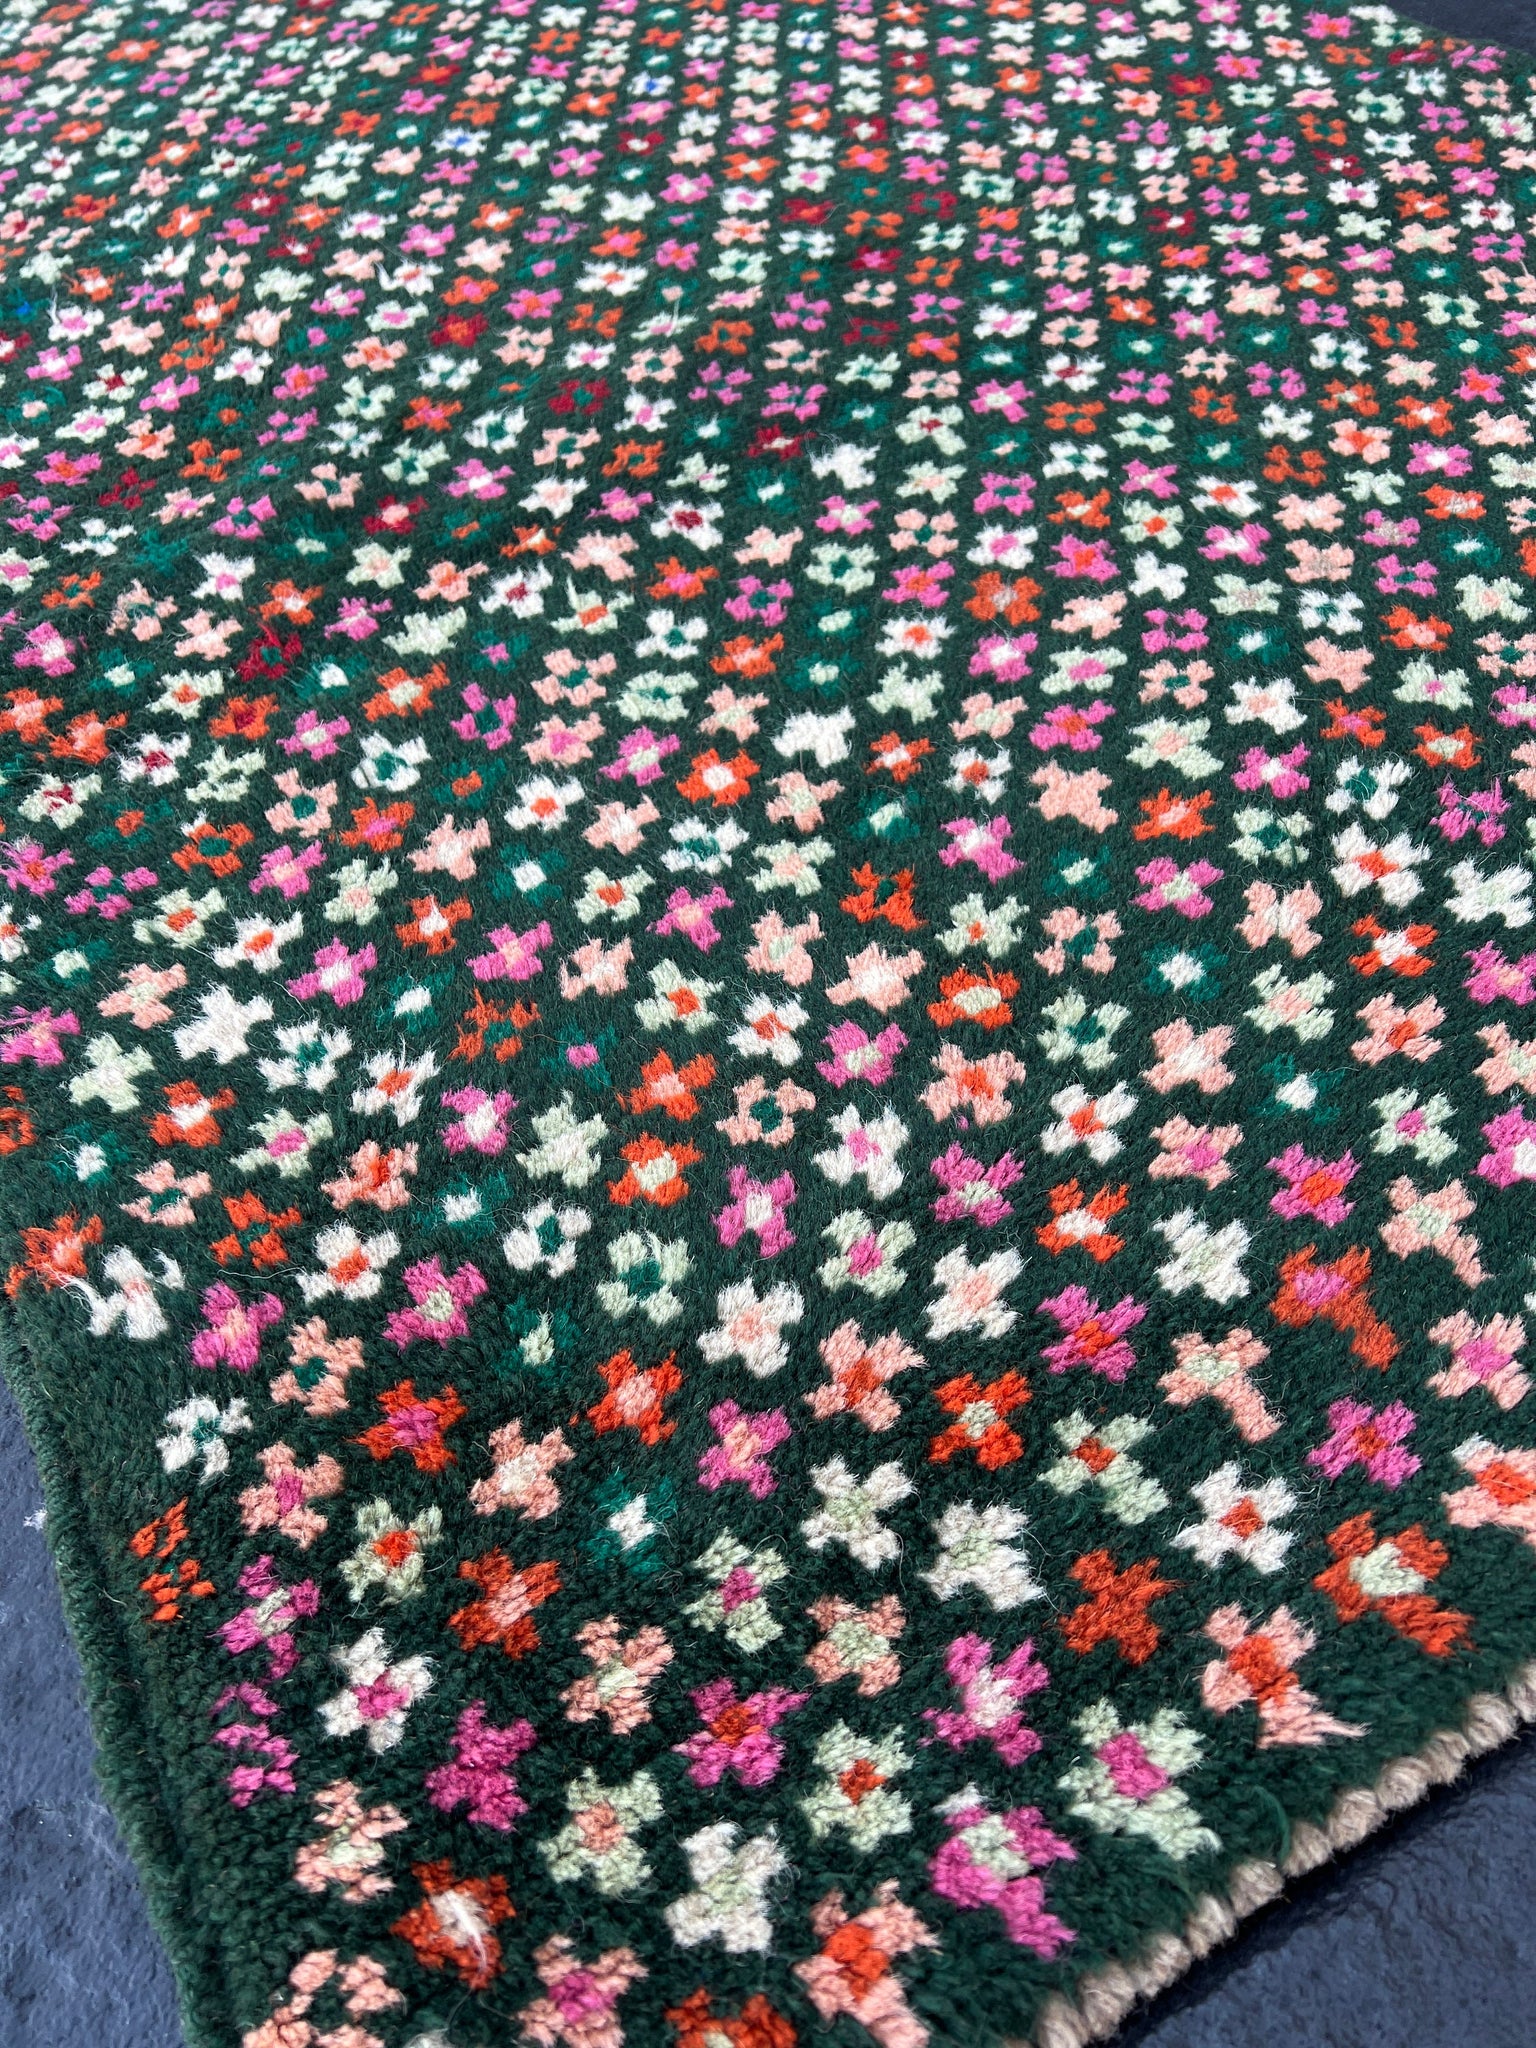 3x10 (90x305) Handmade Vintage Baluch Afghan Runner Rug | Pine Green Rose Pink Burnt Orange Blush Pink Turquoise Ivory | Hand Knotted Wool